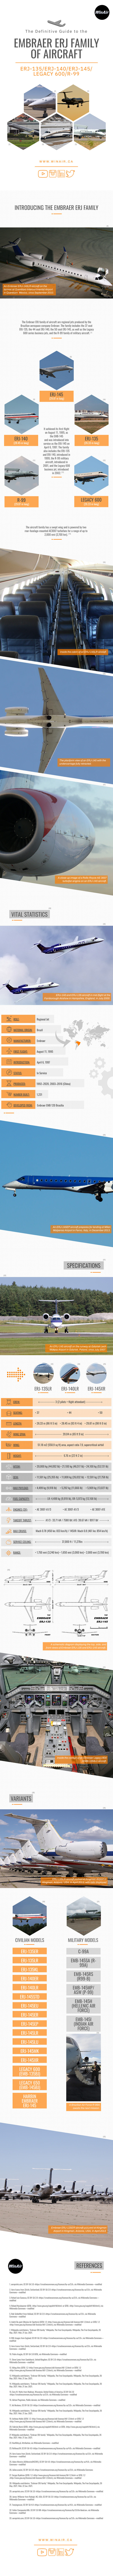 The Definitive Guide to the Embraer ERJ Family of Aircraft - WinAir Infographic